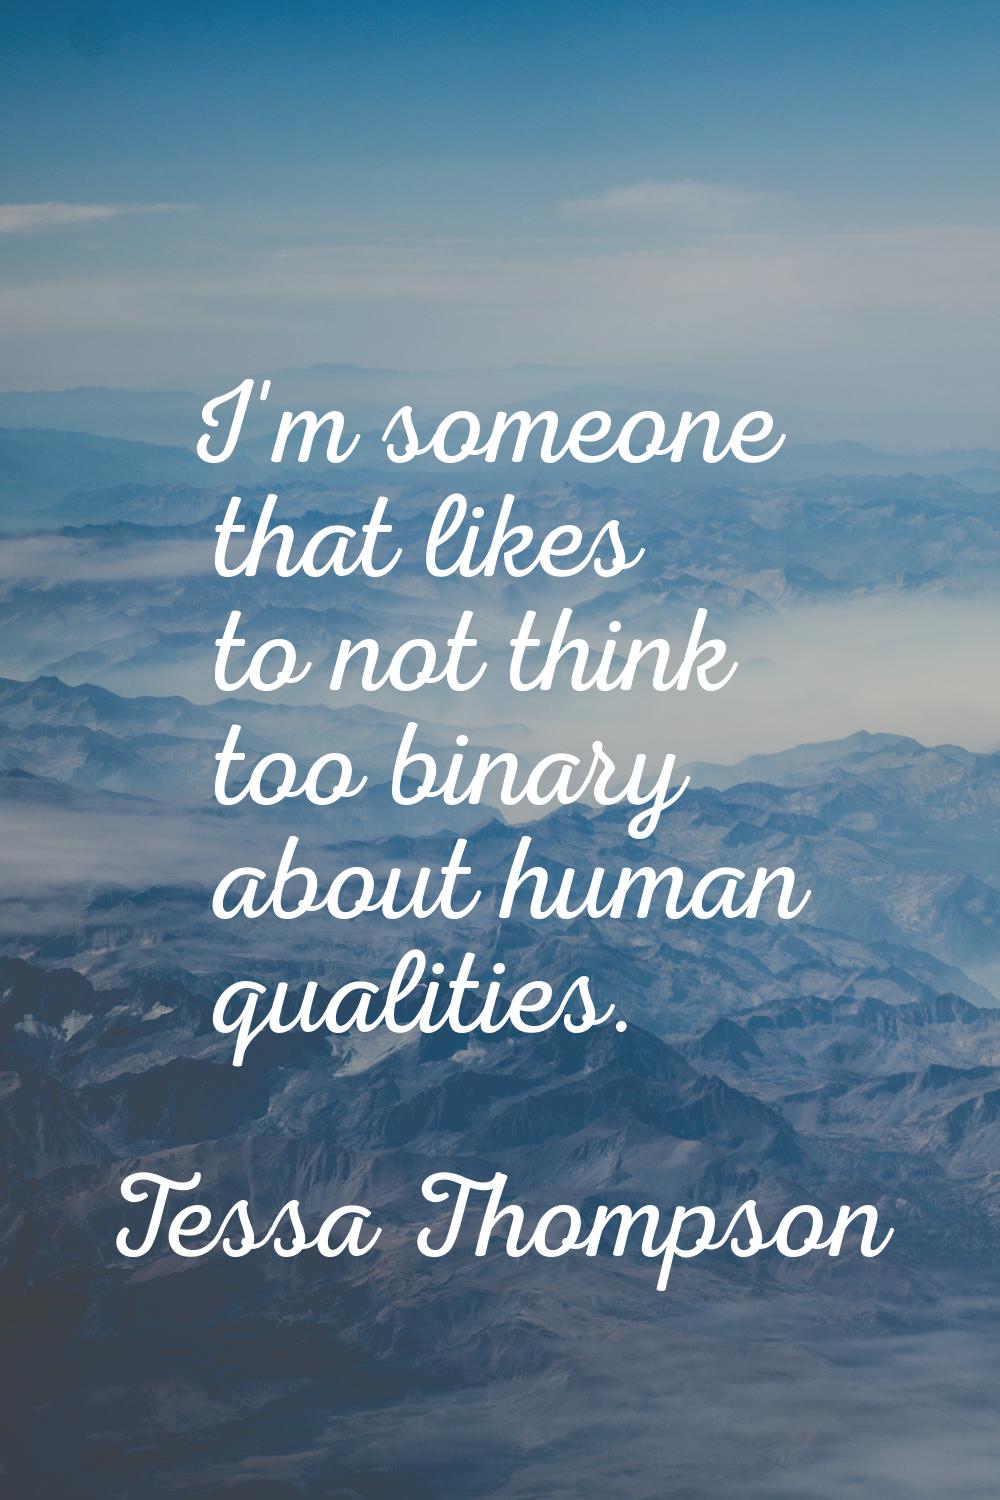 I'm someone that likes to not think too binary about human qualities.